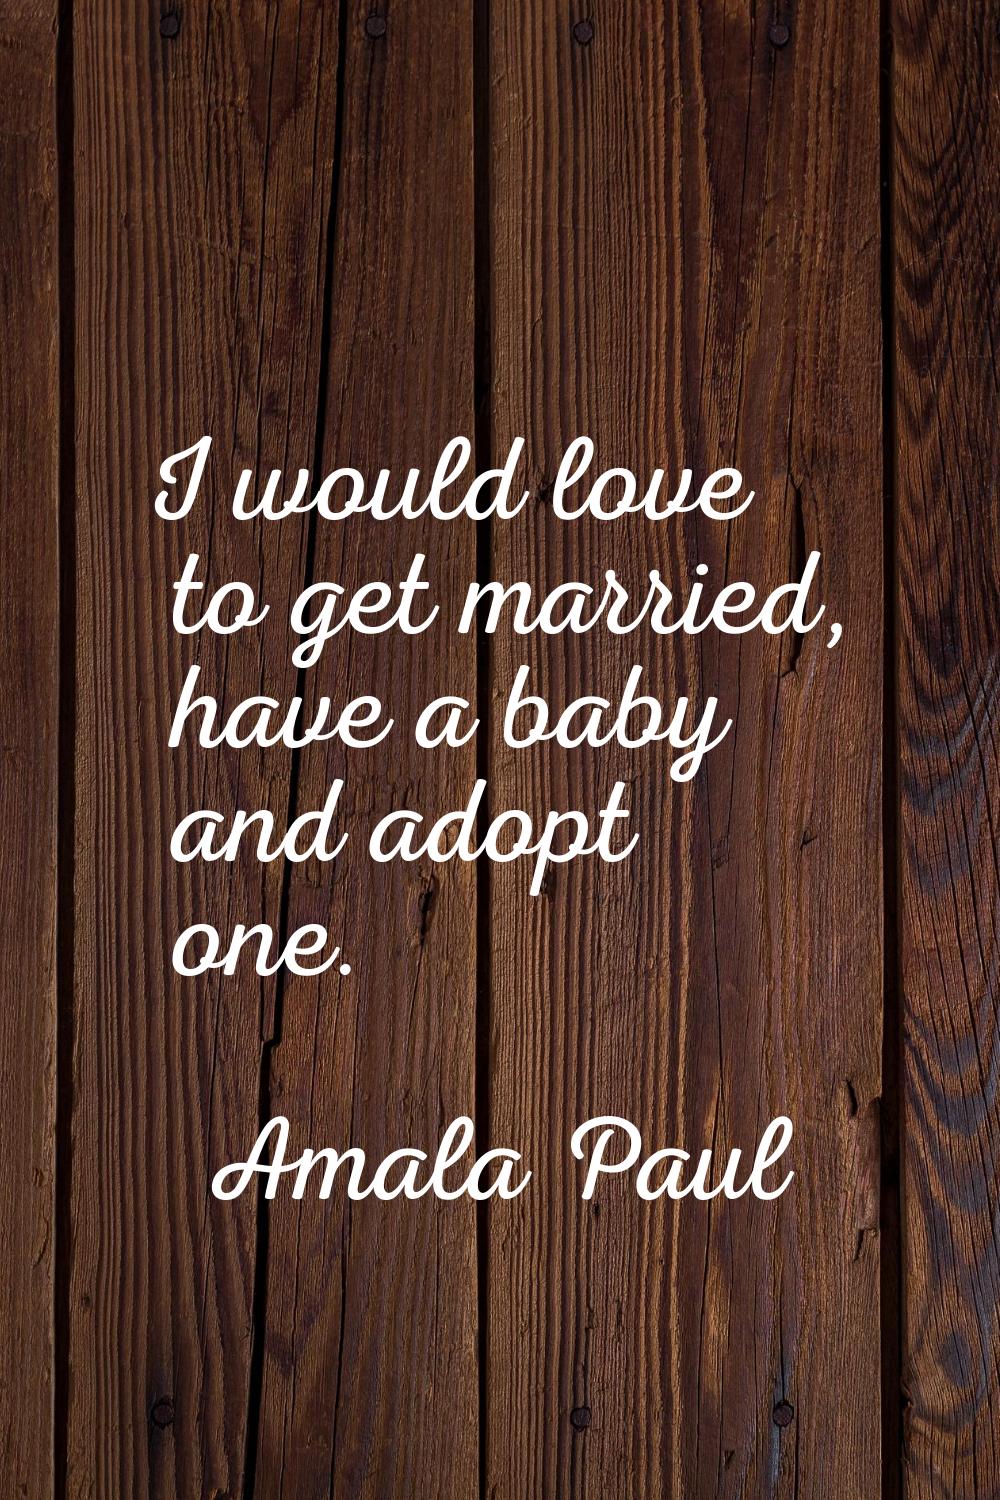 I would love to get married, have a baby and adopt one.